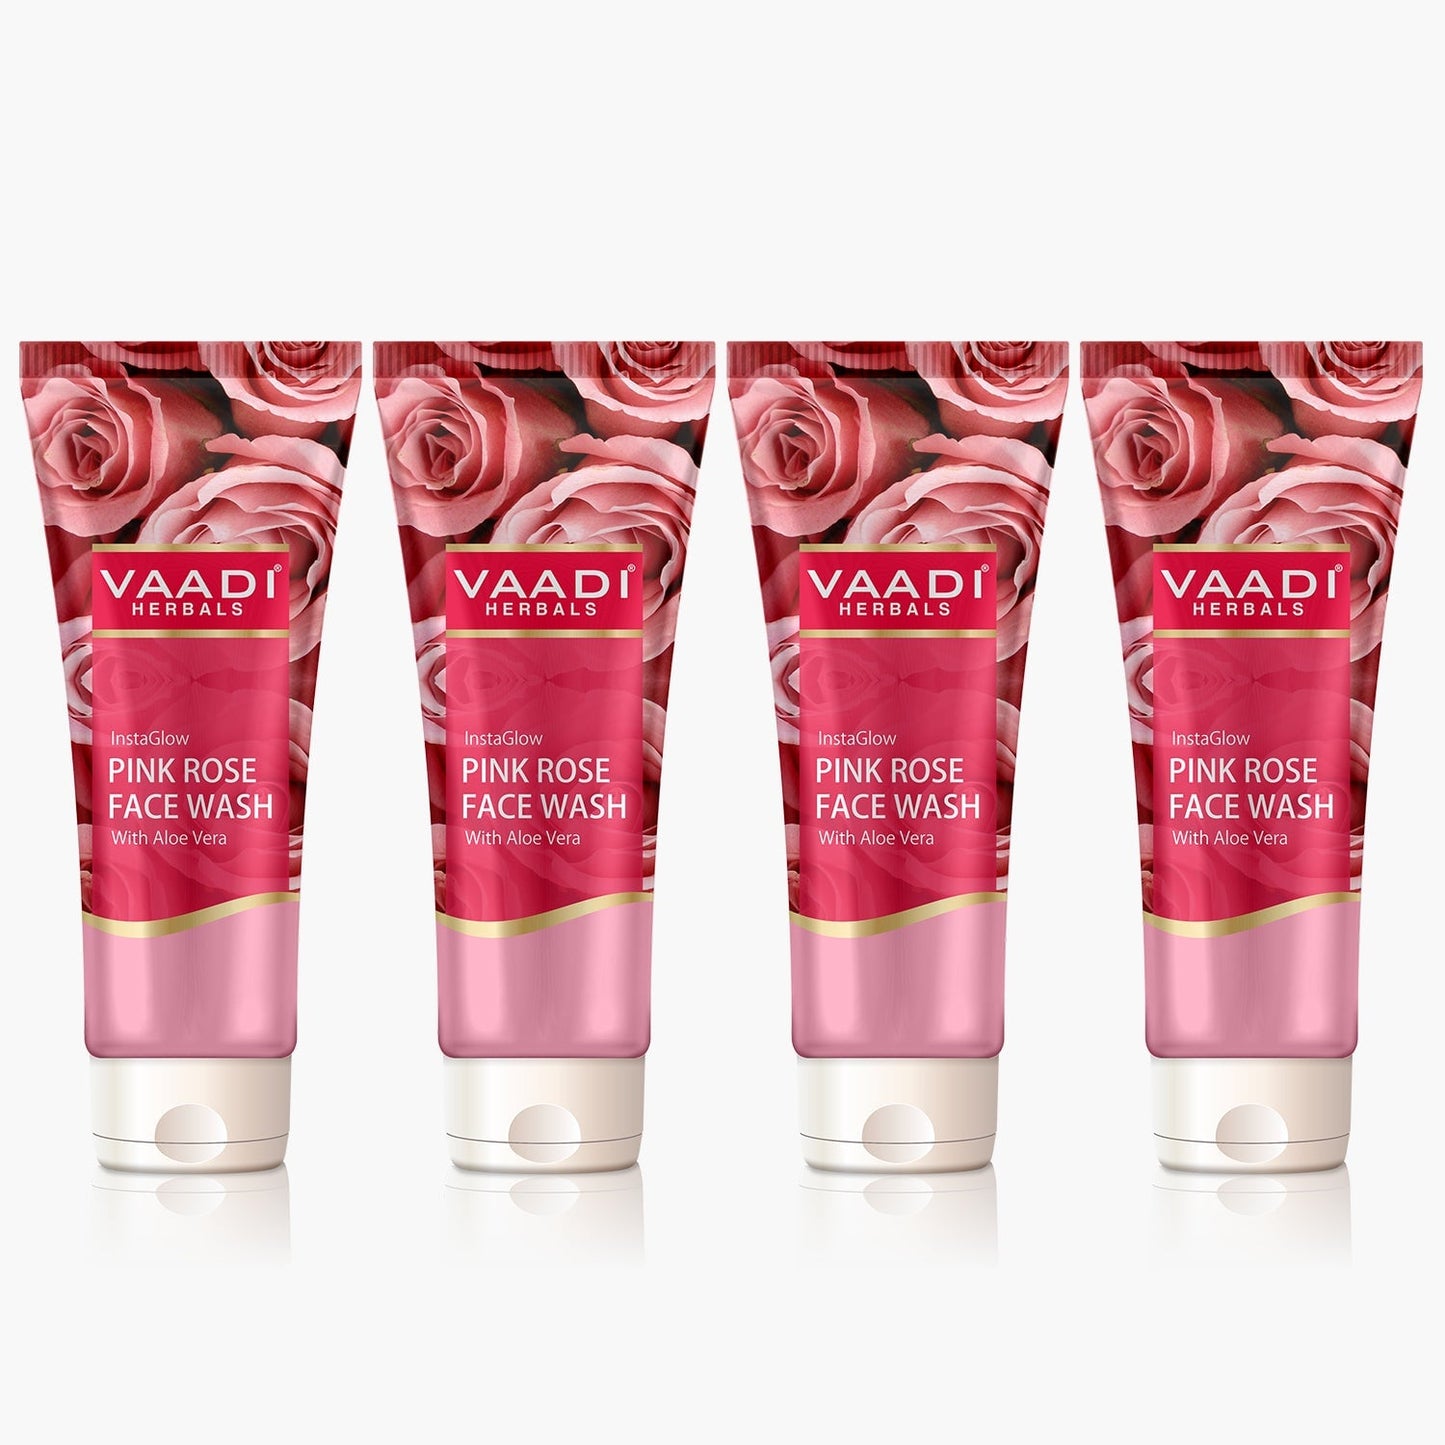 Insta Glow Pink Rose Face wash with Aloe vera extract (4 x 60 ml/2.1 fl oz)